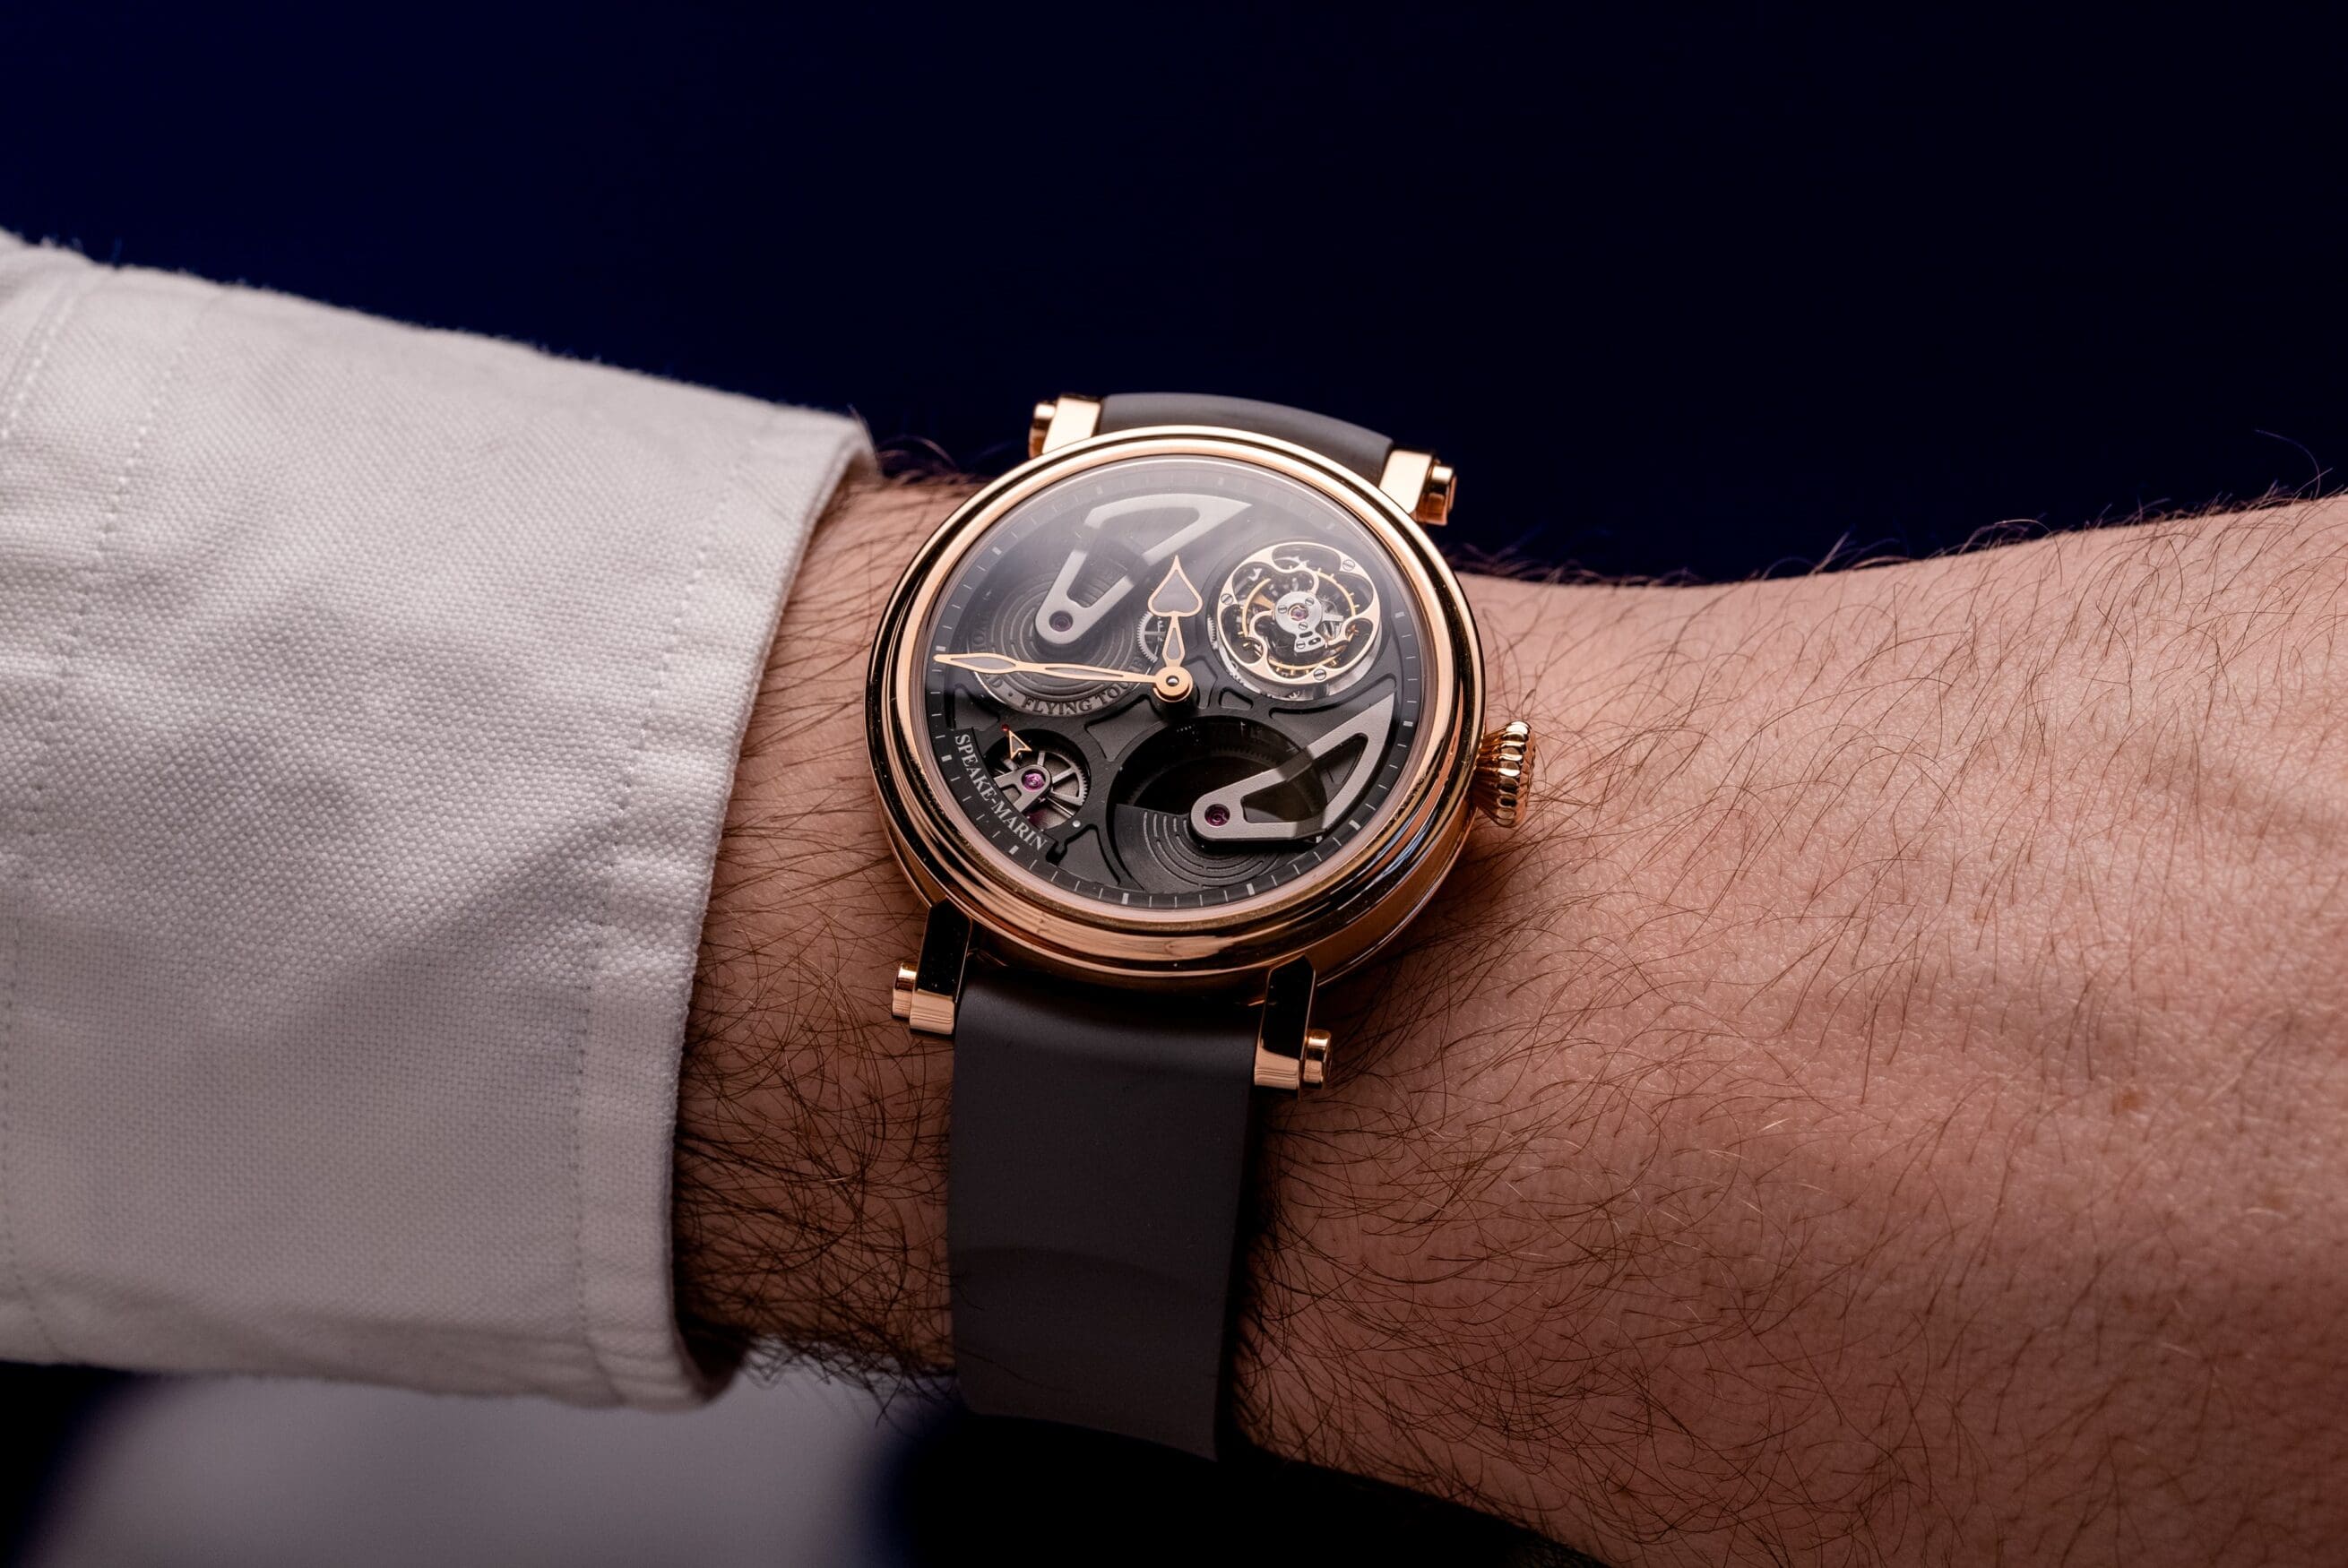 HANDS-ON: The Speake-Marin One & Two Openworked Tourbillon blends the best of youth and tradition